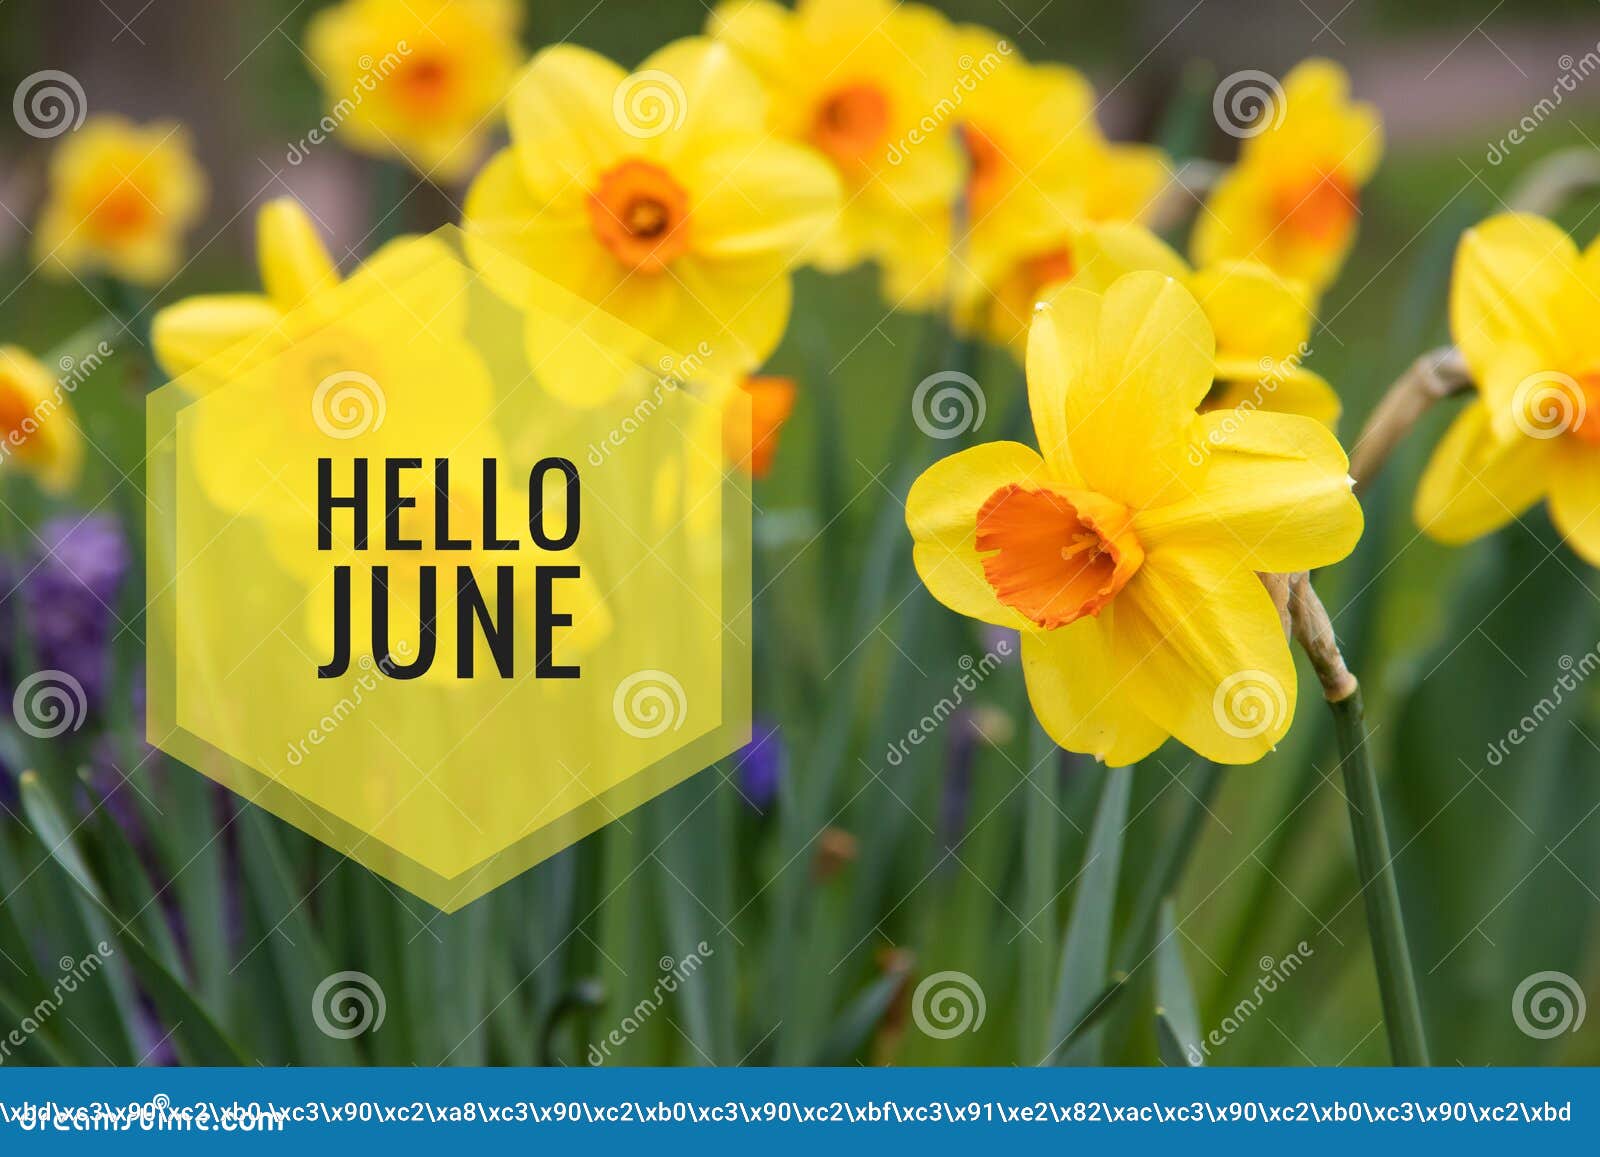 banner hello june. new season . welcome card photo with flowers. yellow flowers. spring flowers. flower narcissus